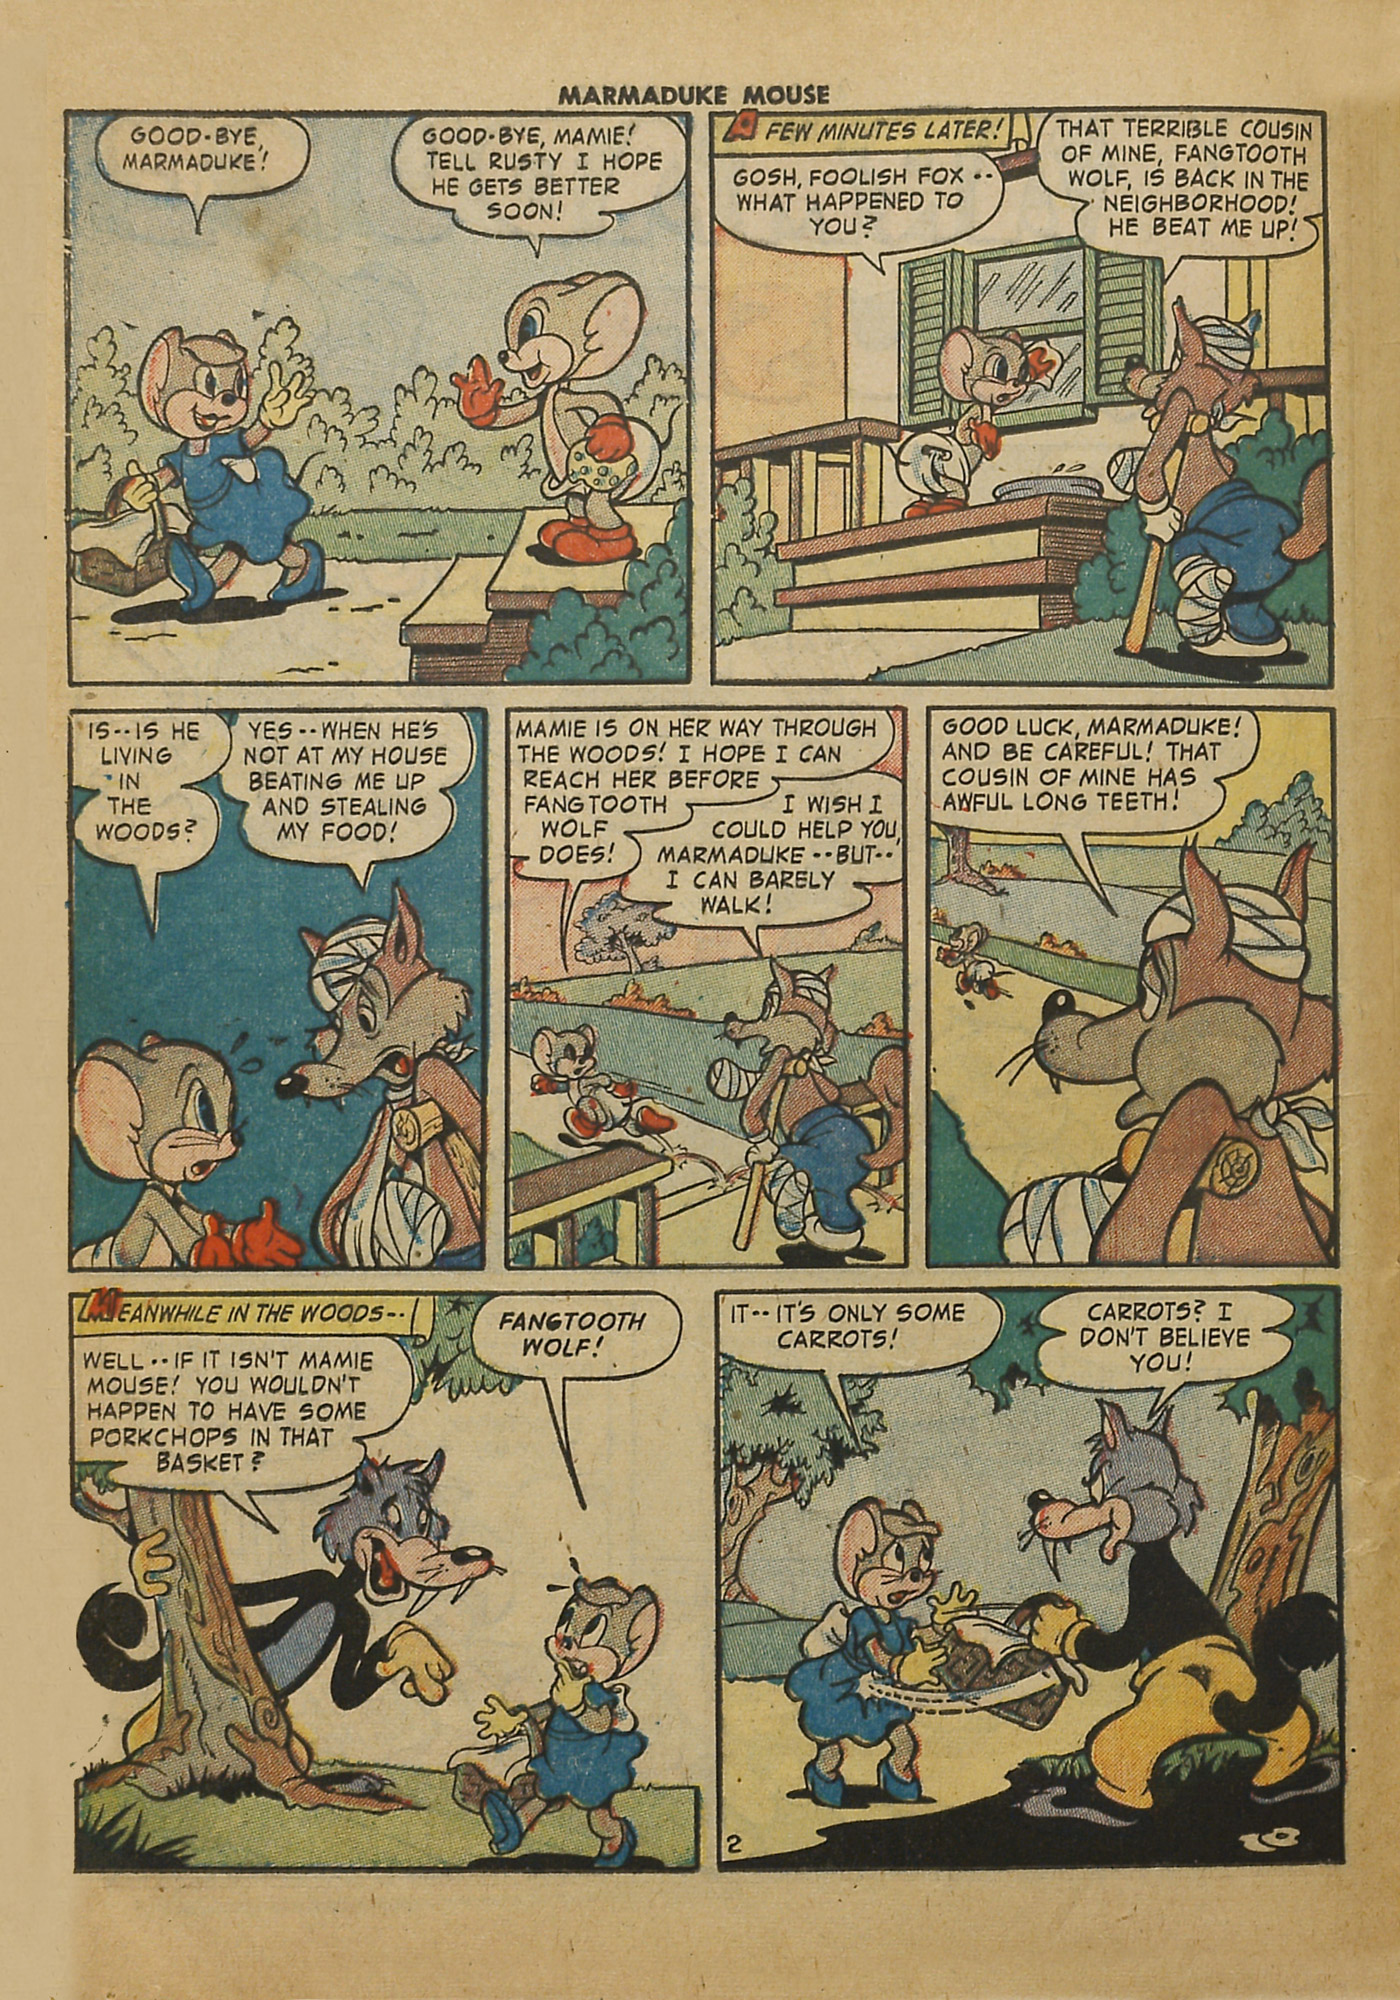 Read online Marmaduke Mouse comic -  Issue #38 - 20